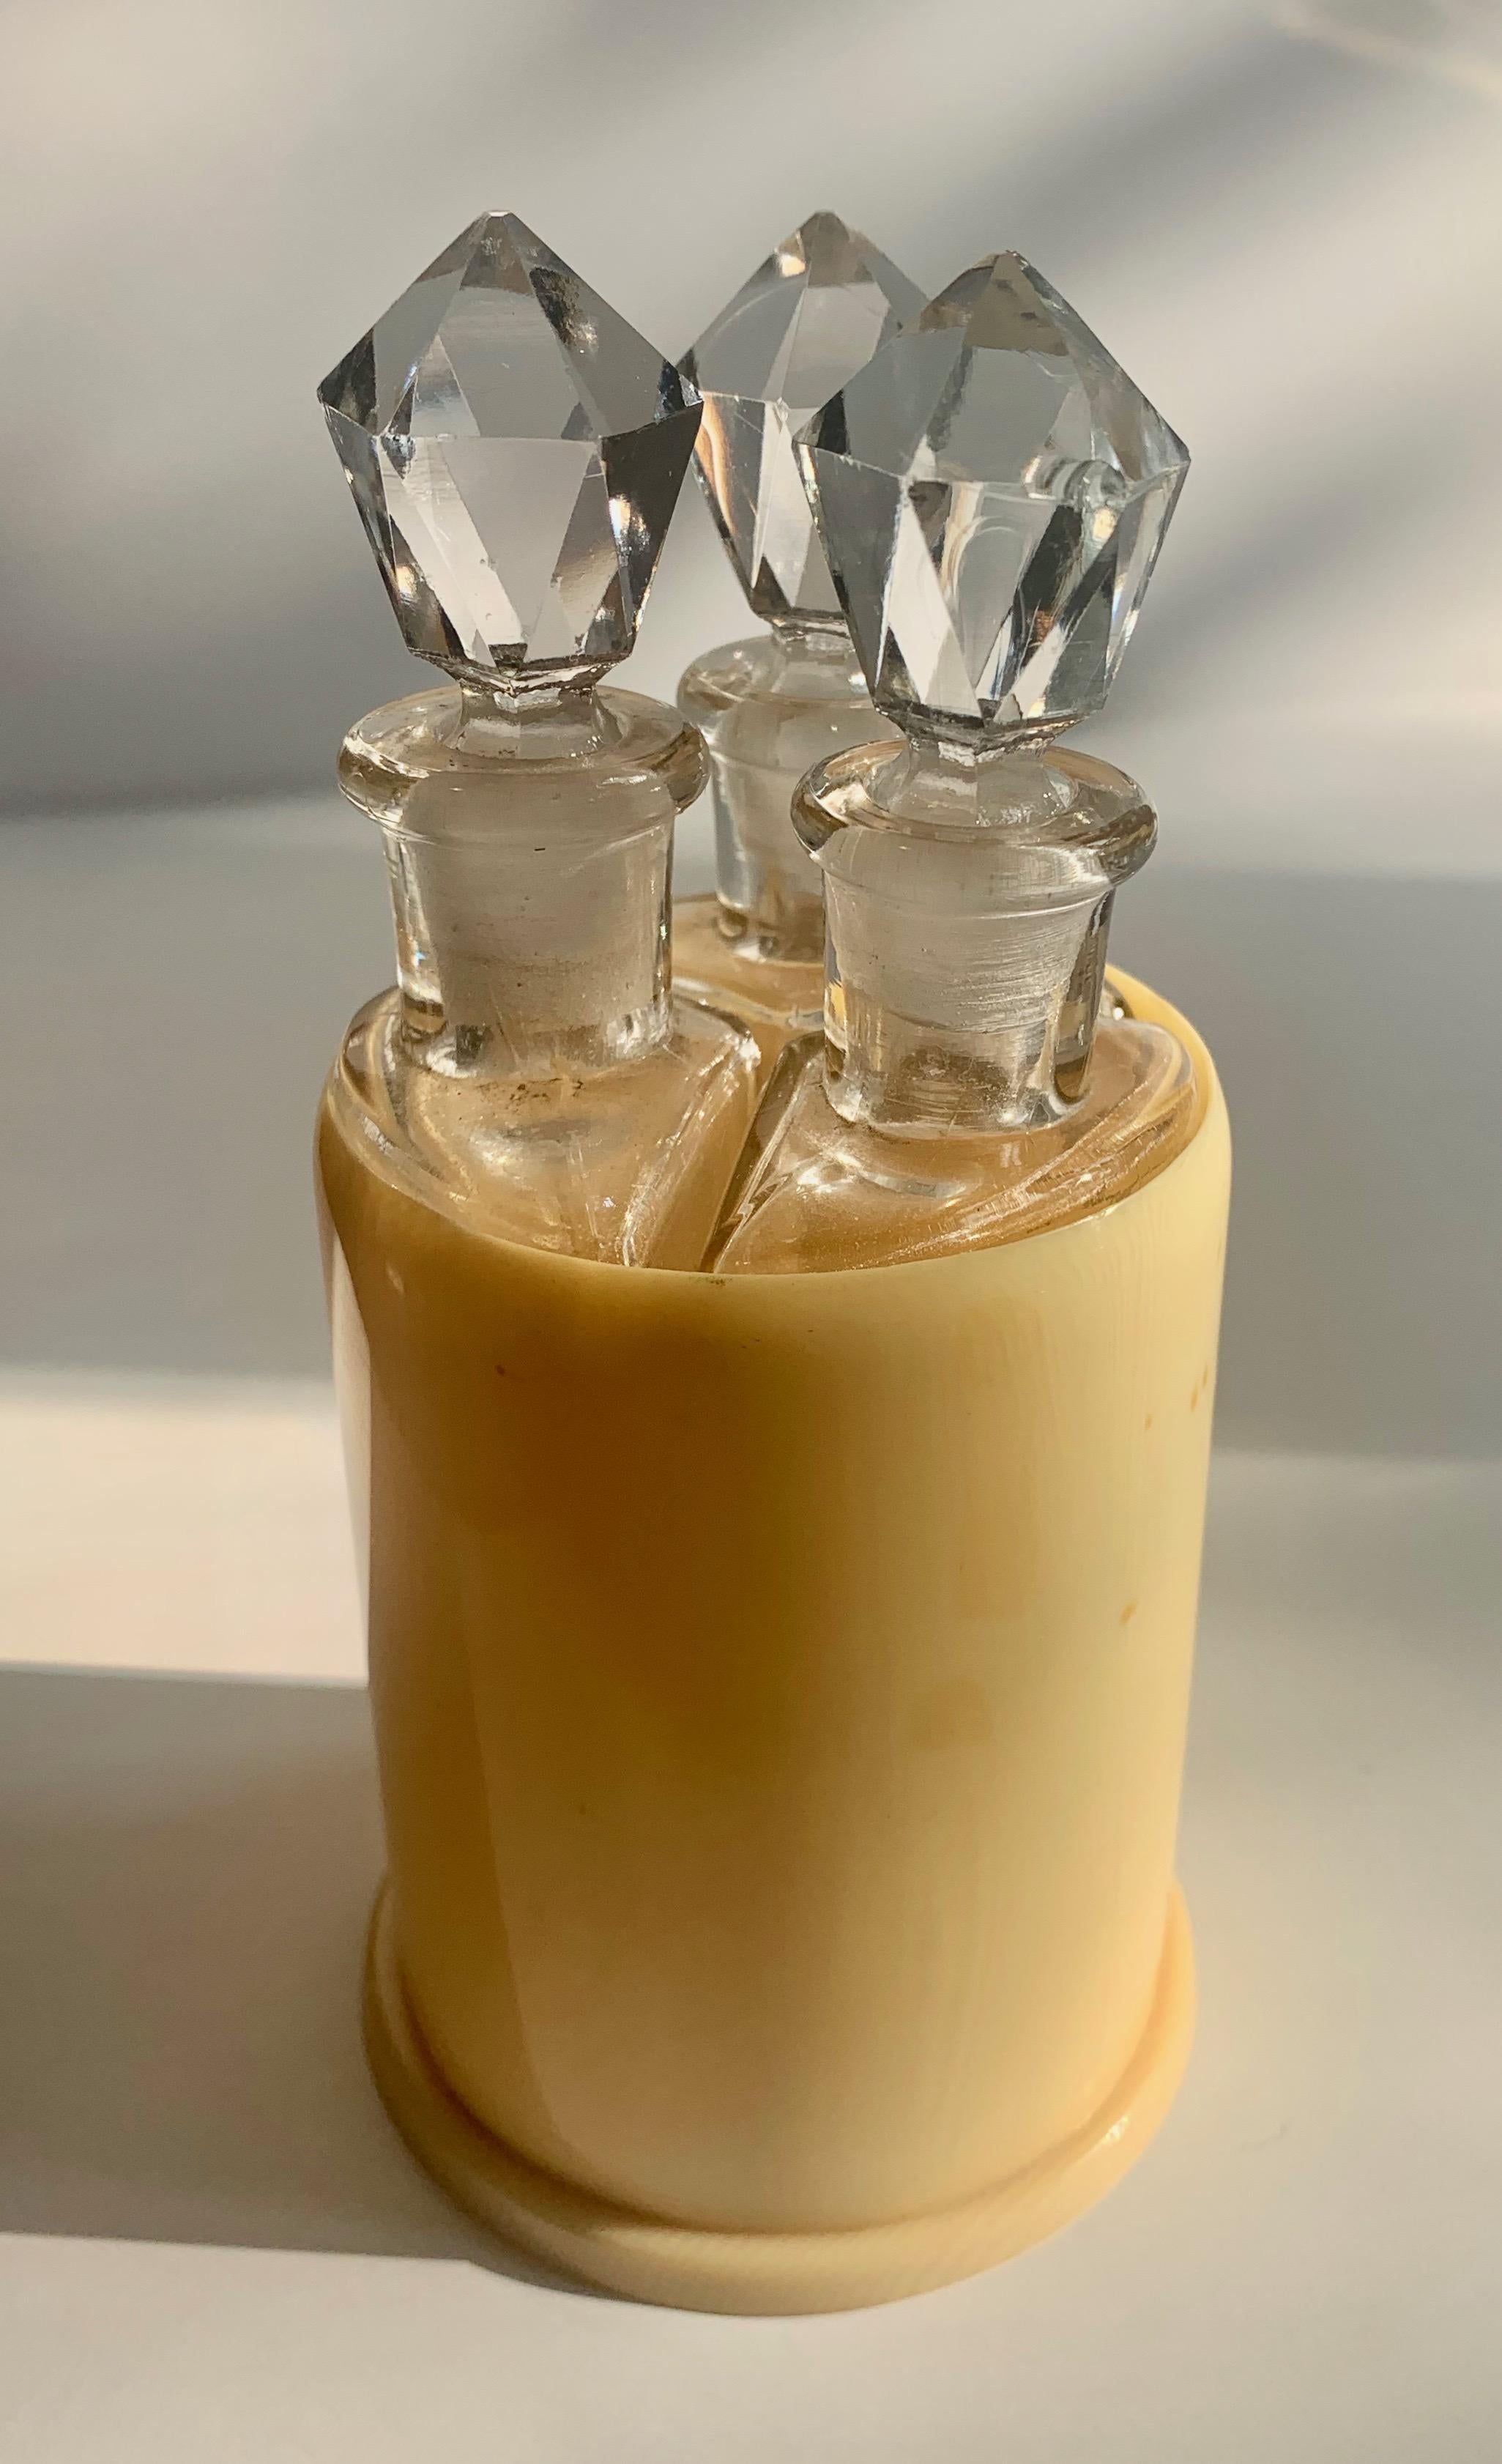 Set of three bottles in holder - three unique triangular shaped bottles with crystal stoppers in round holder. The trio are perfect for perfumes, or as extract holder in the gourmet kitchen.